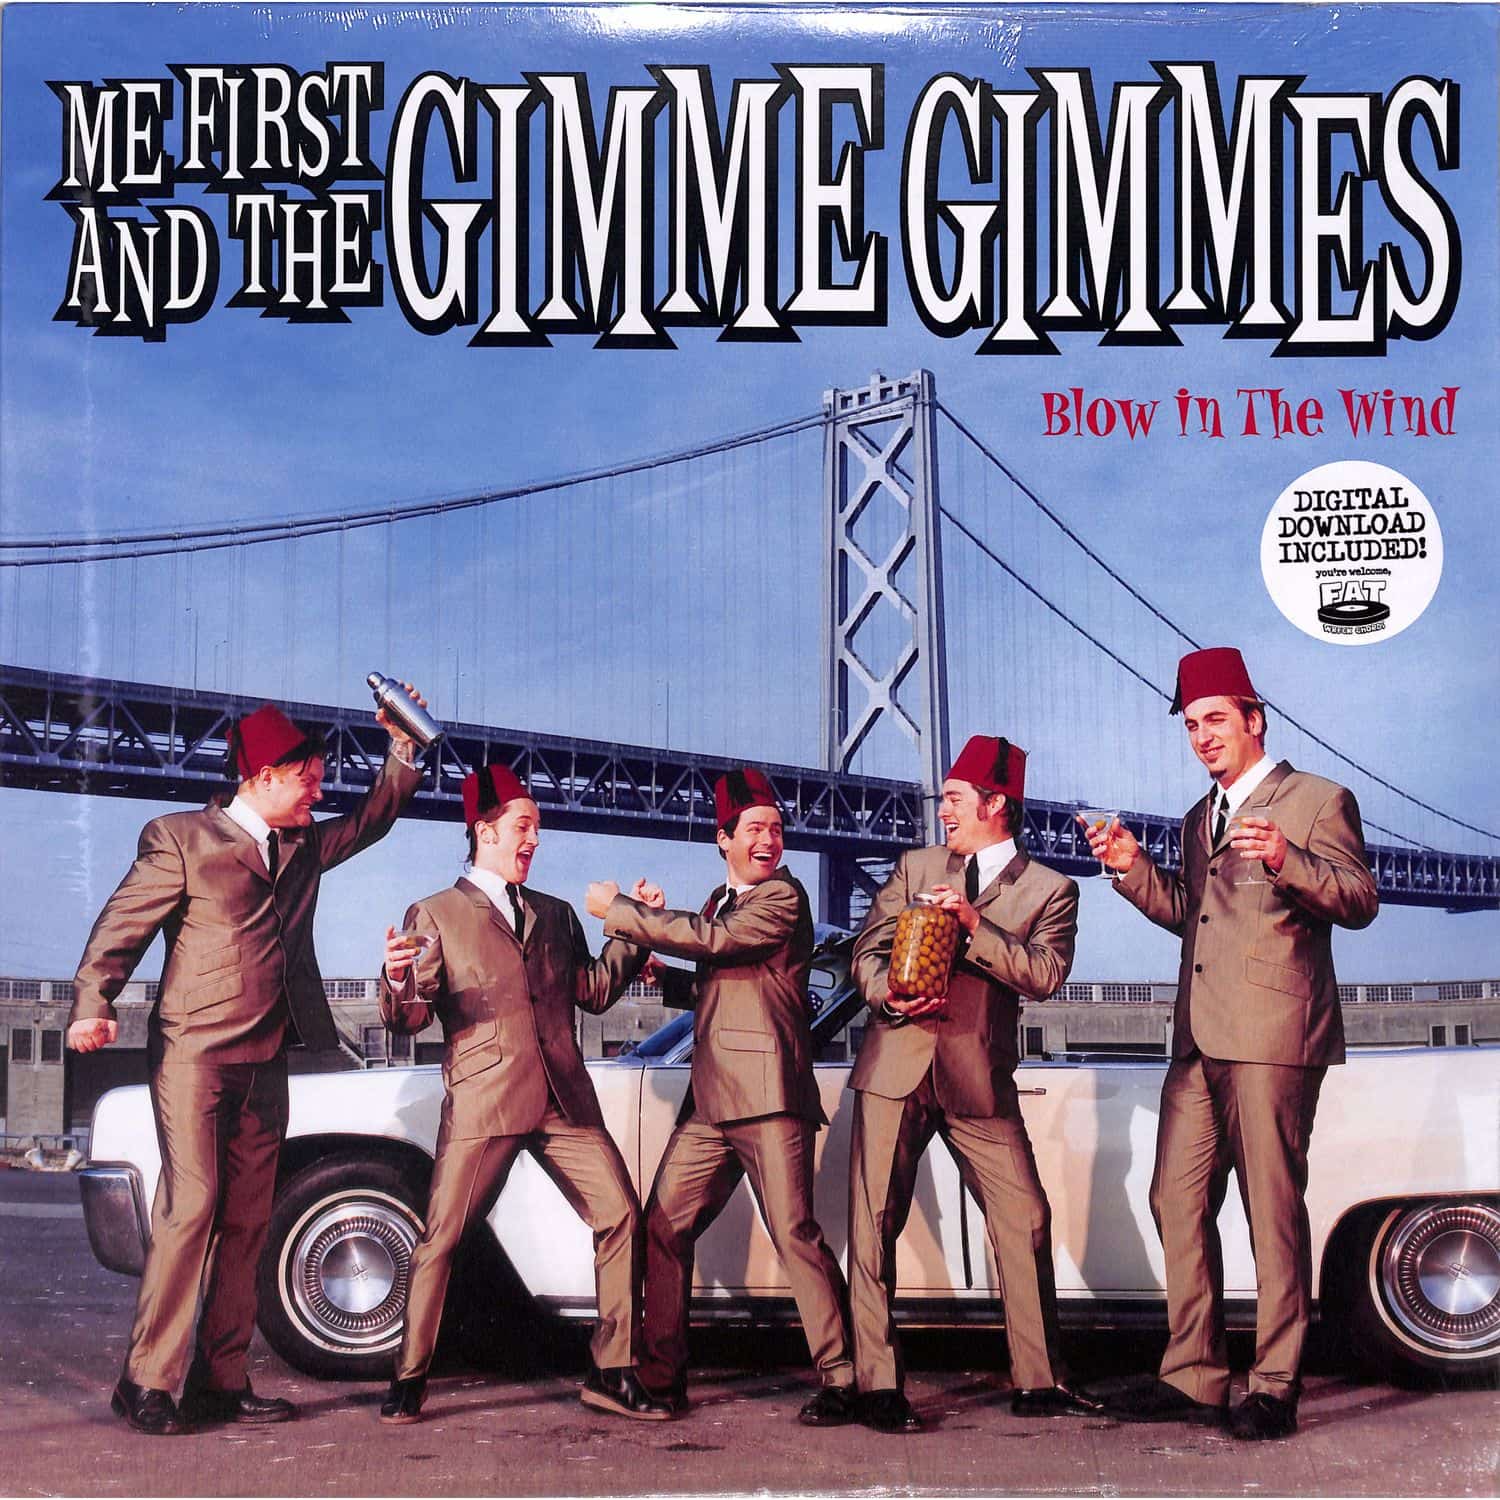 Me First And The Gimme Gimmes - BLOW IN THE WIND 